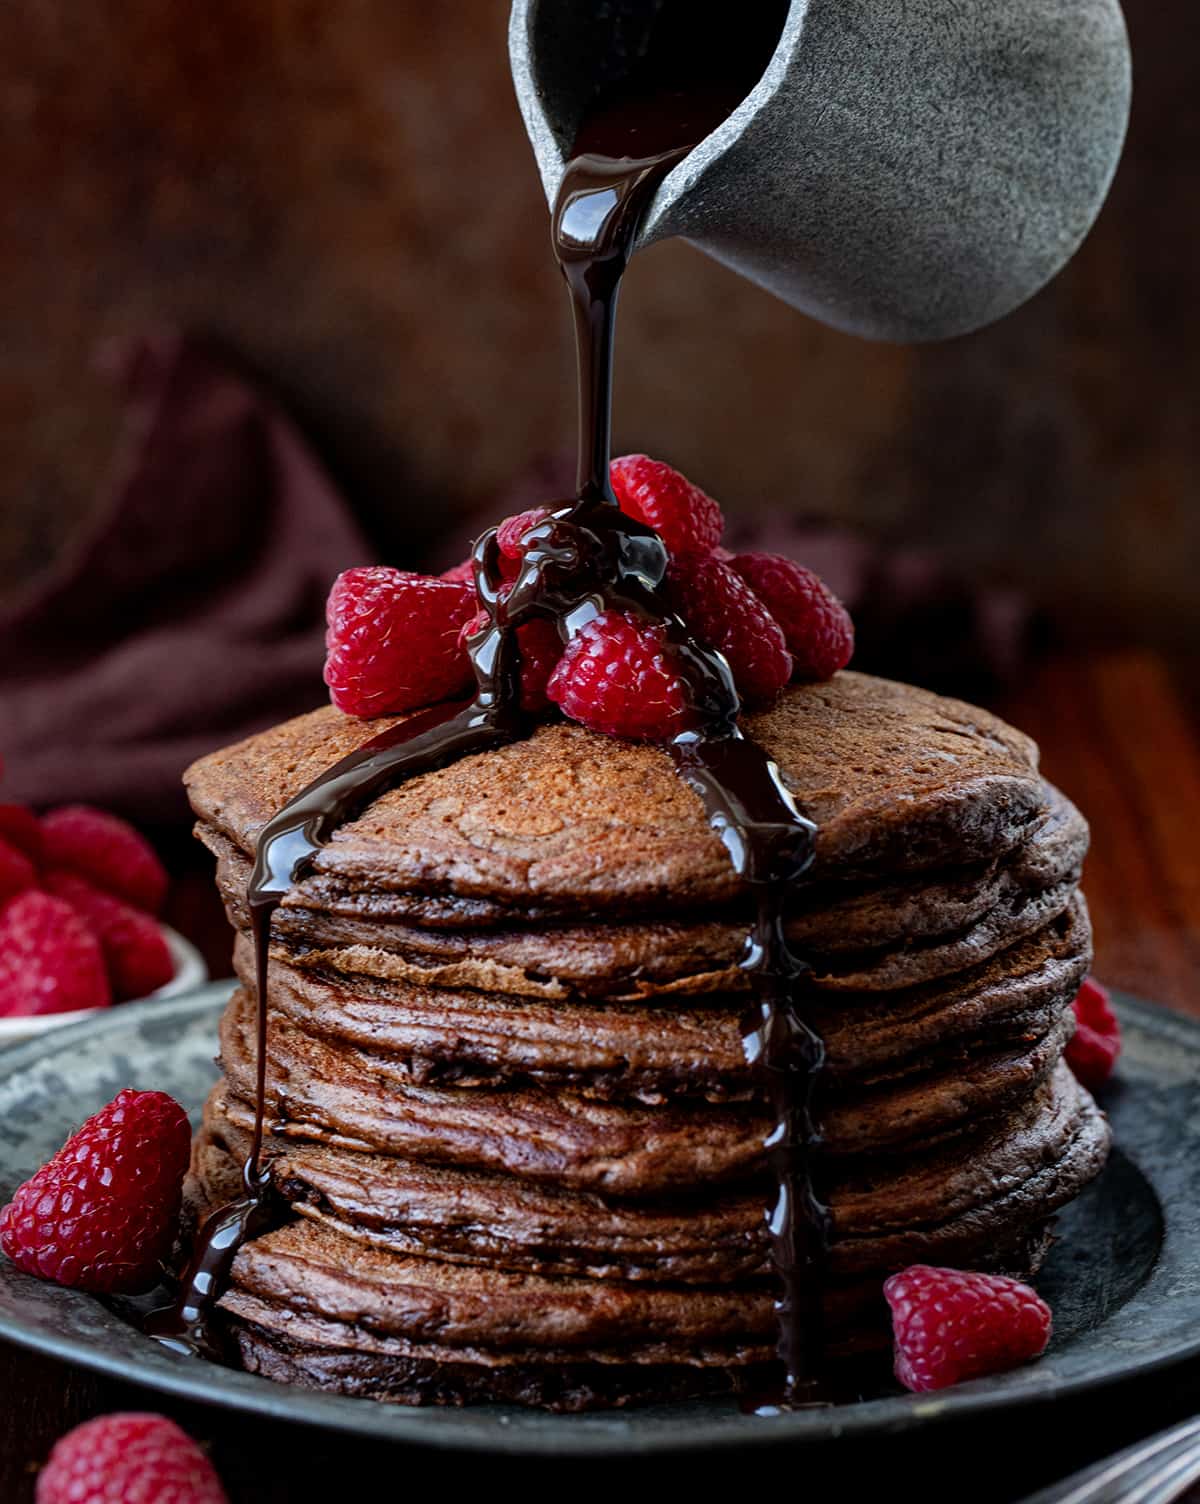 Pouring chocolate sauce over a stack of Chocolate Pancakes on a wooden table with raspberries on top and around.